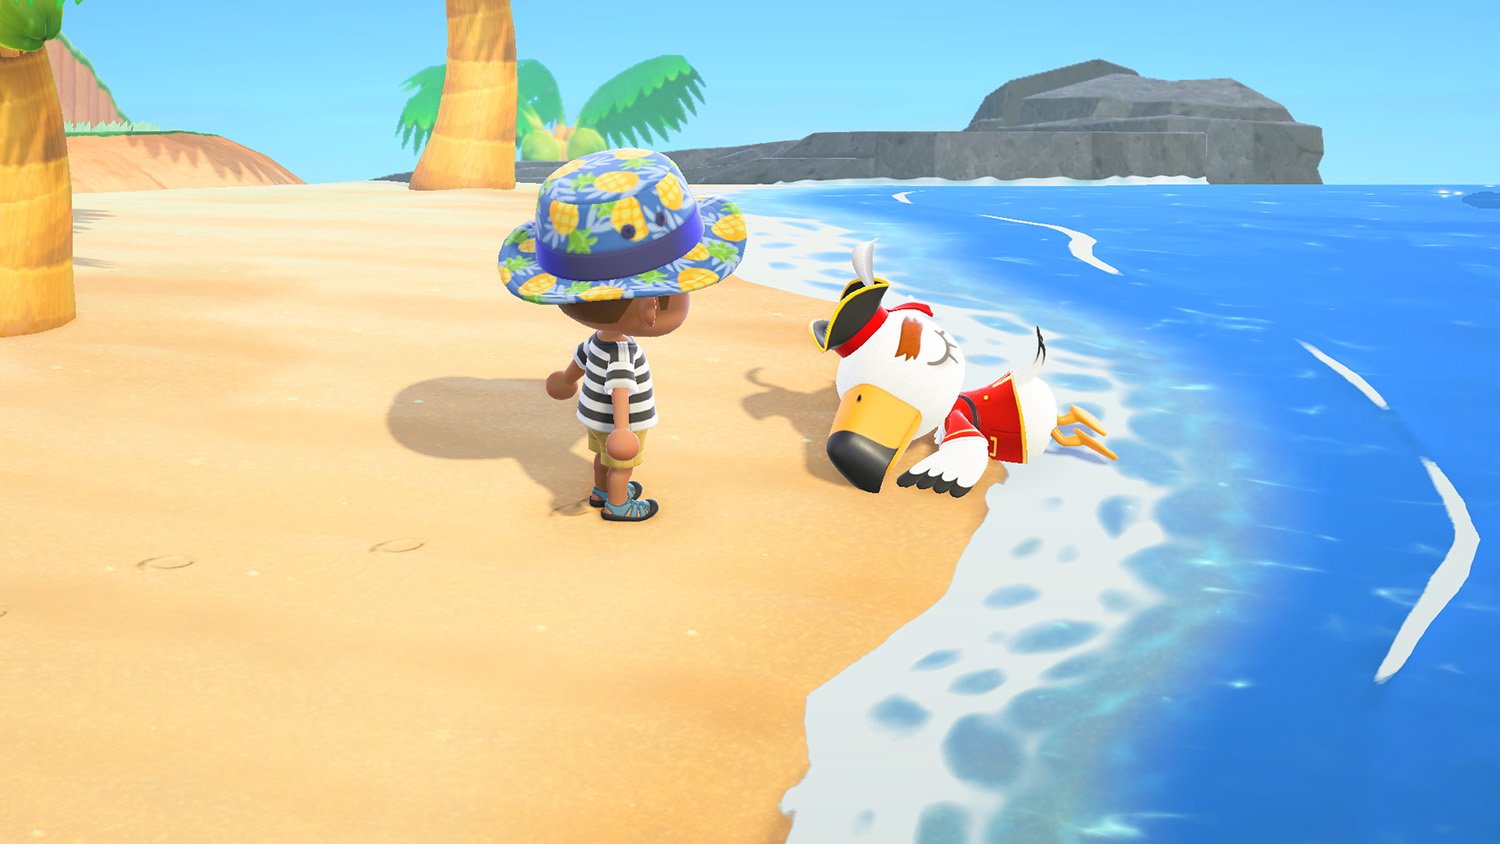 A villager looks at Gullivarr washed up on the beach in Animal Crossing: New Horizons in July